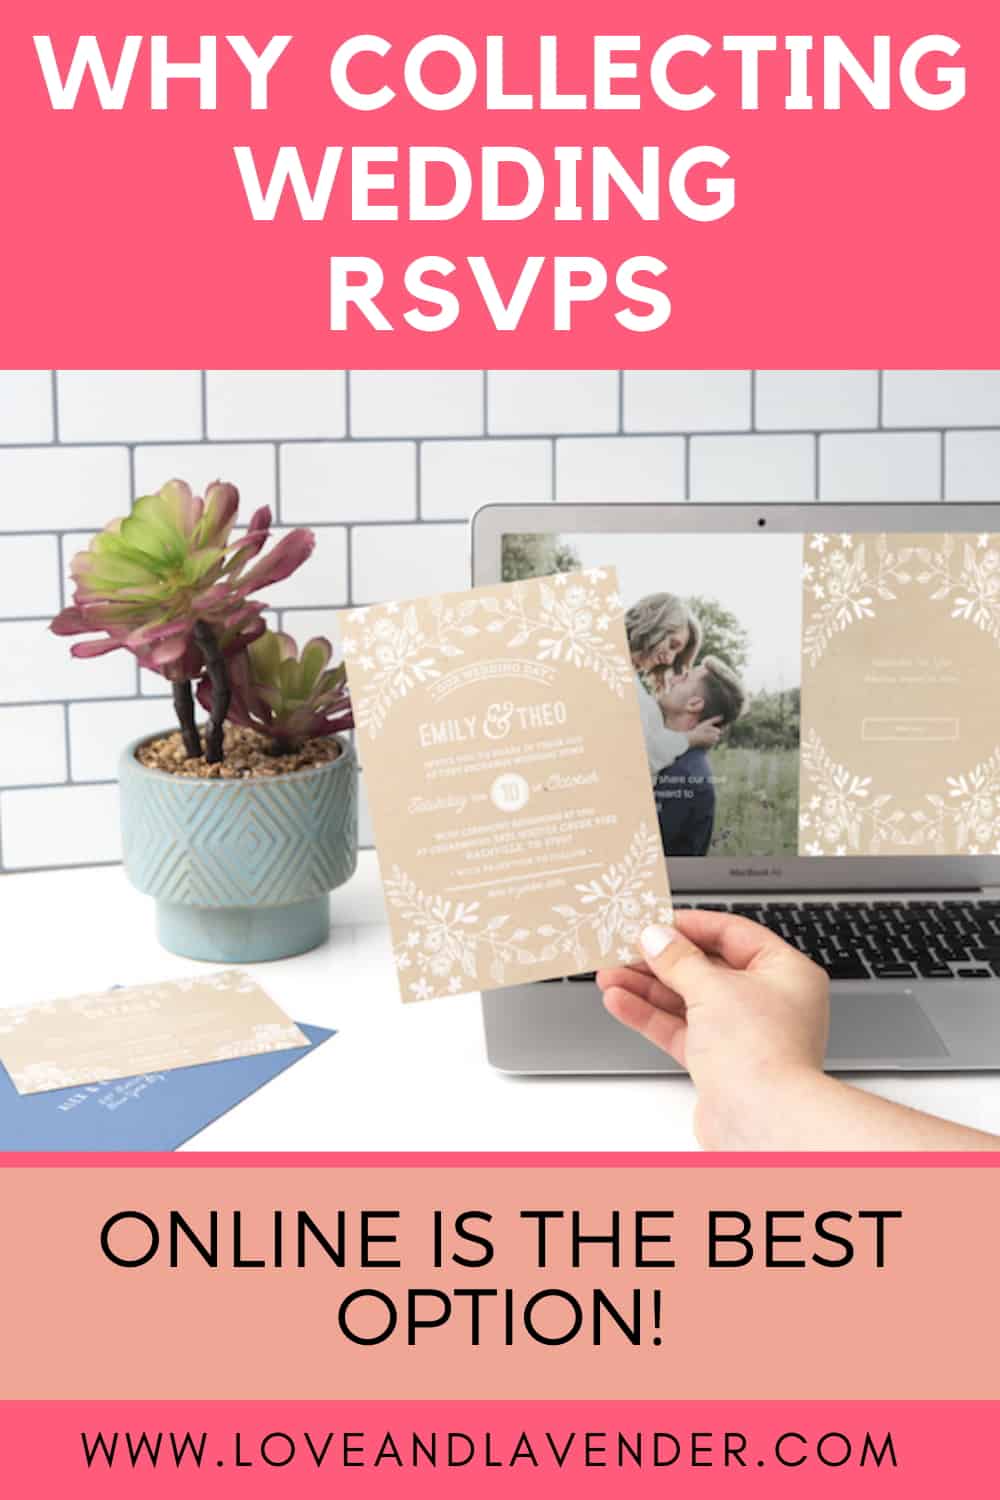 Pinterest Pin - Collecting Wedding RSVPs online